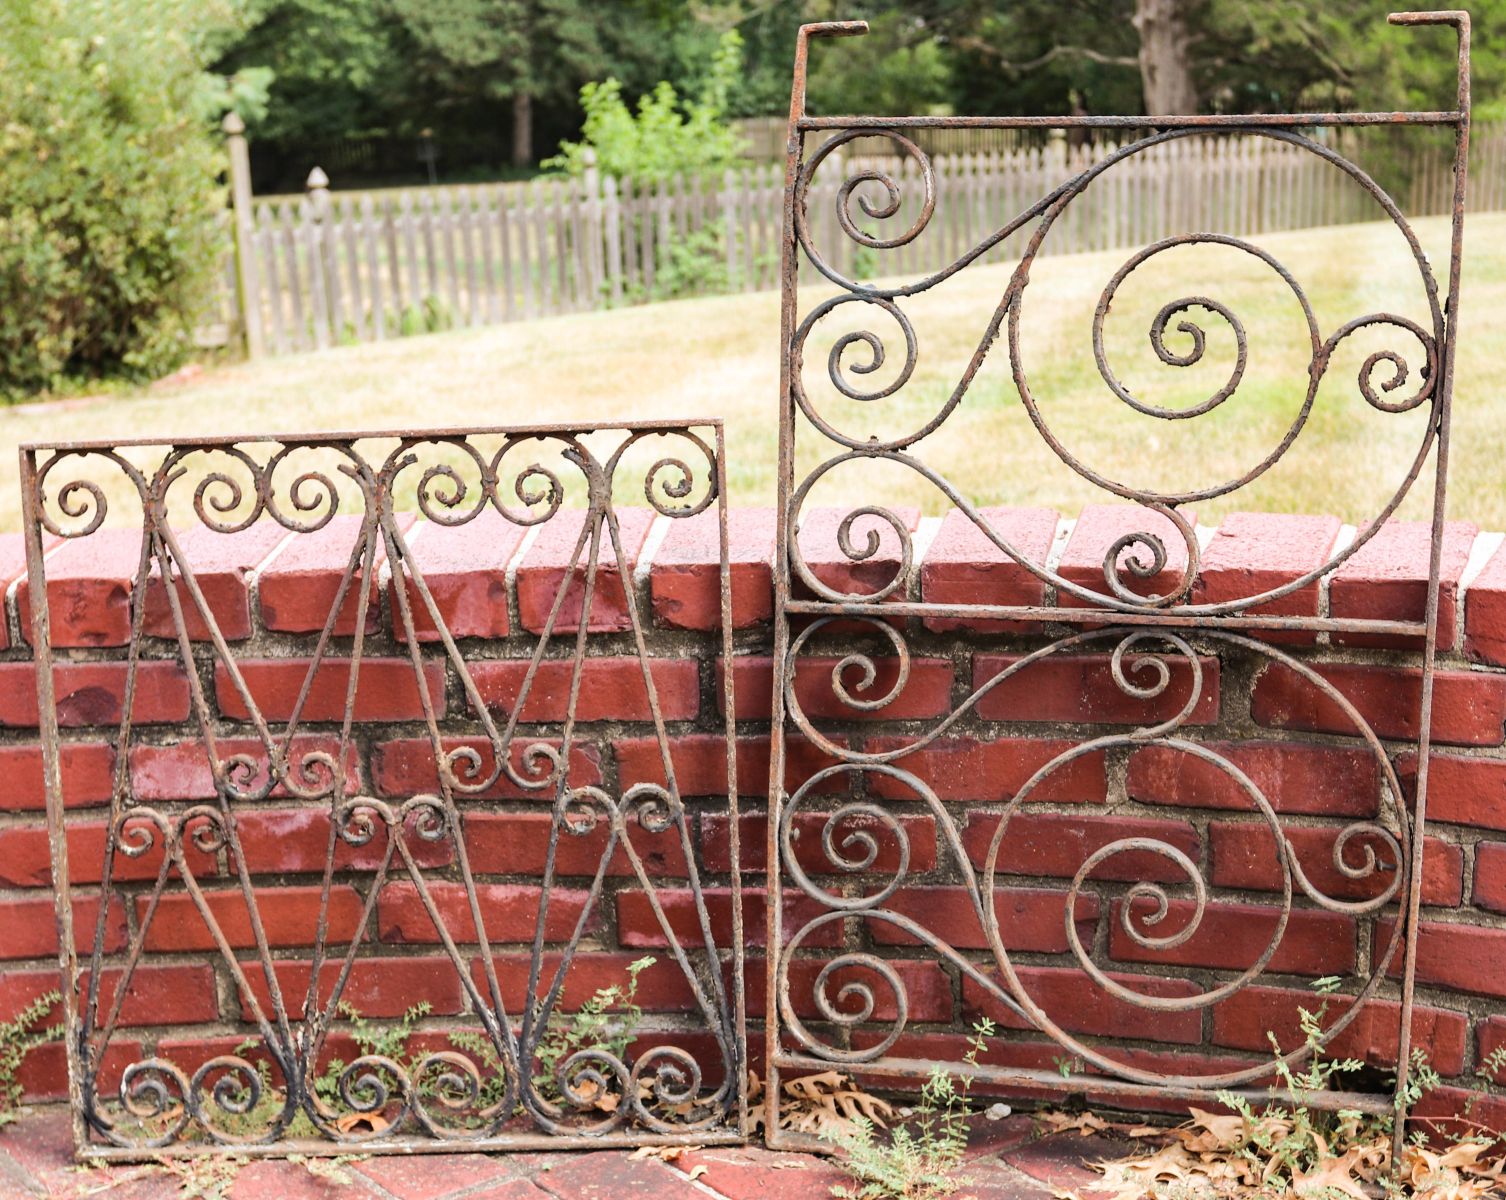 NICE SECTIONS OF ORNATE WROUGHT IRON